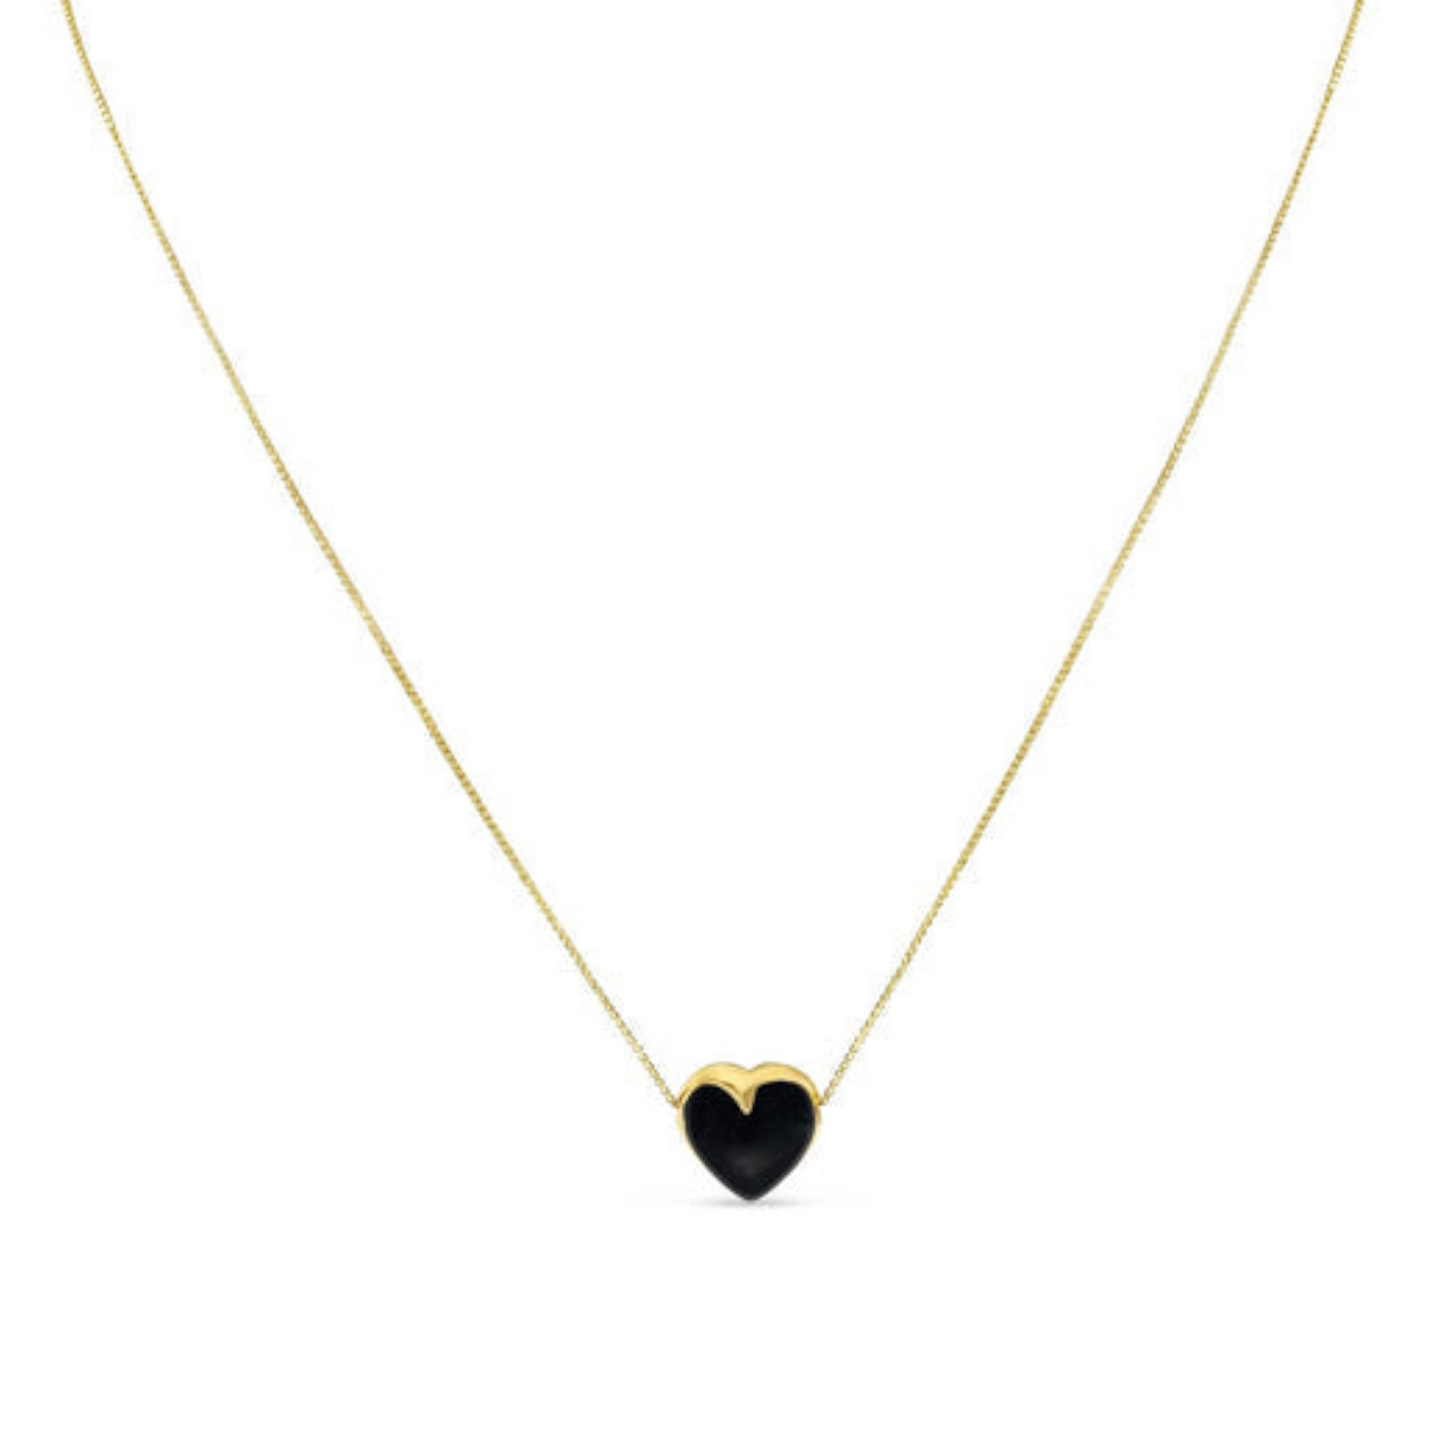 Necklace black heart puff.